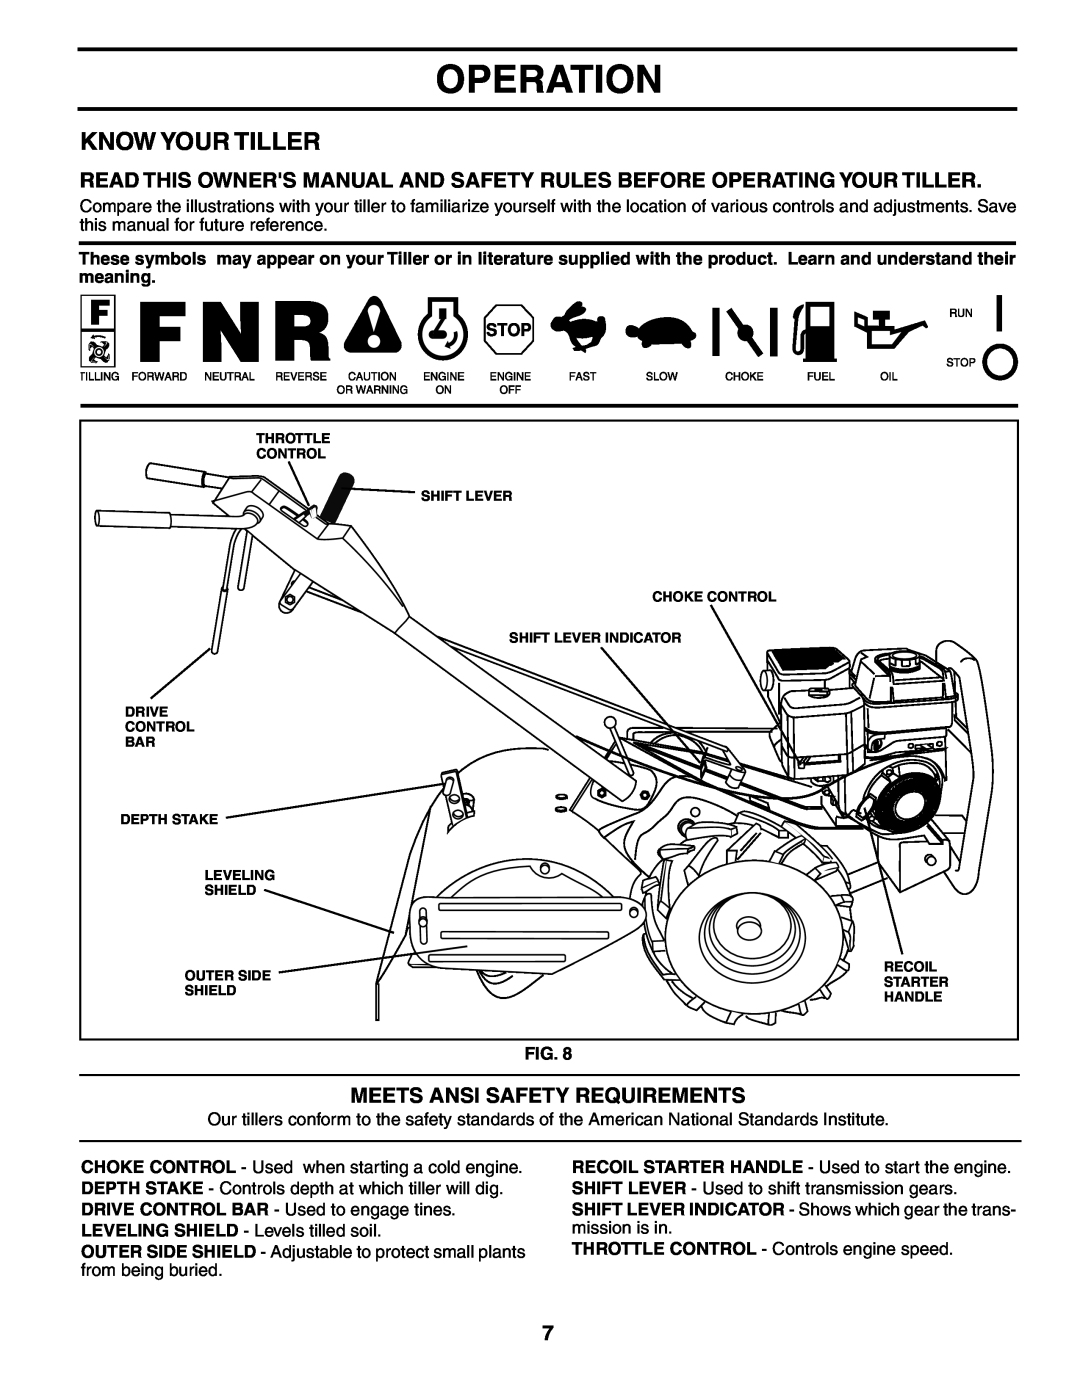 Poulan 188904 owner manual Operation, Know Your Tiller, Meets Ansi Safety Requirements 